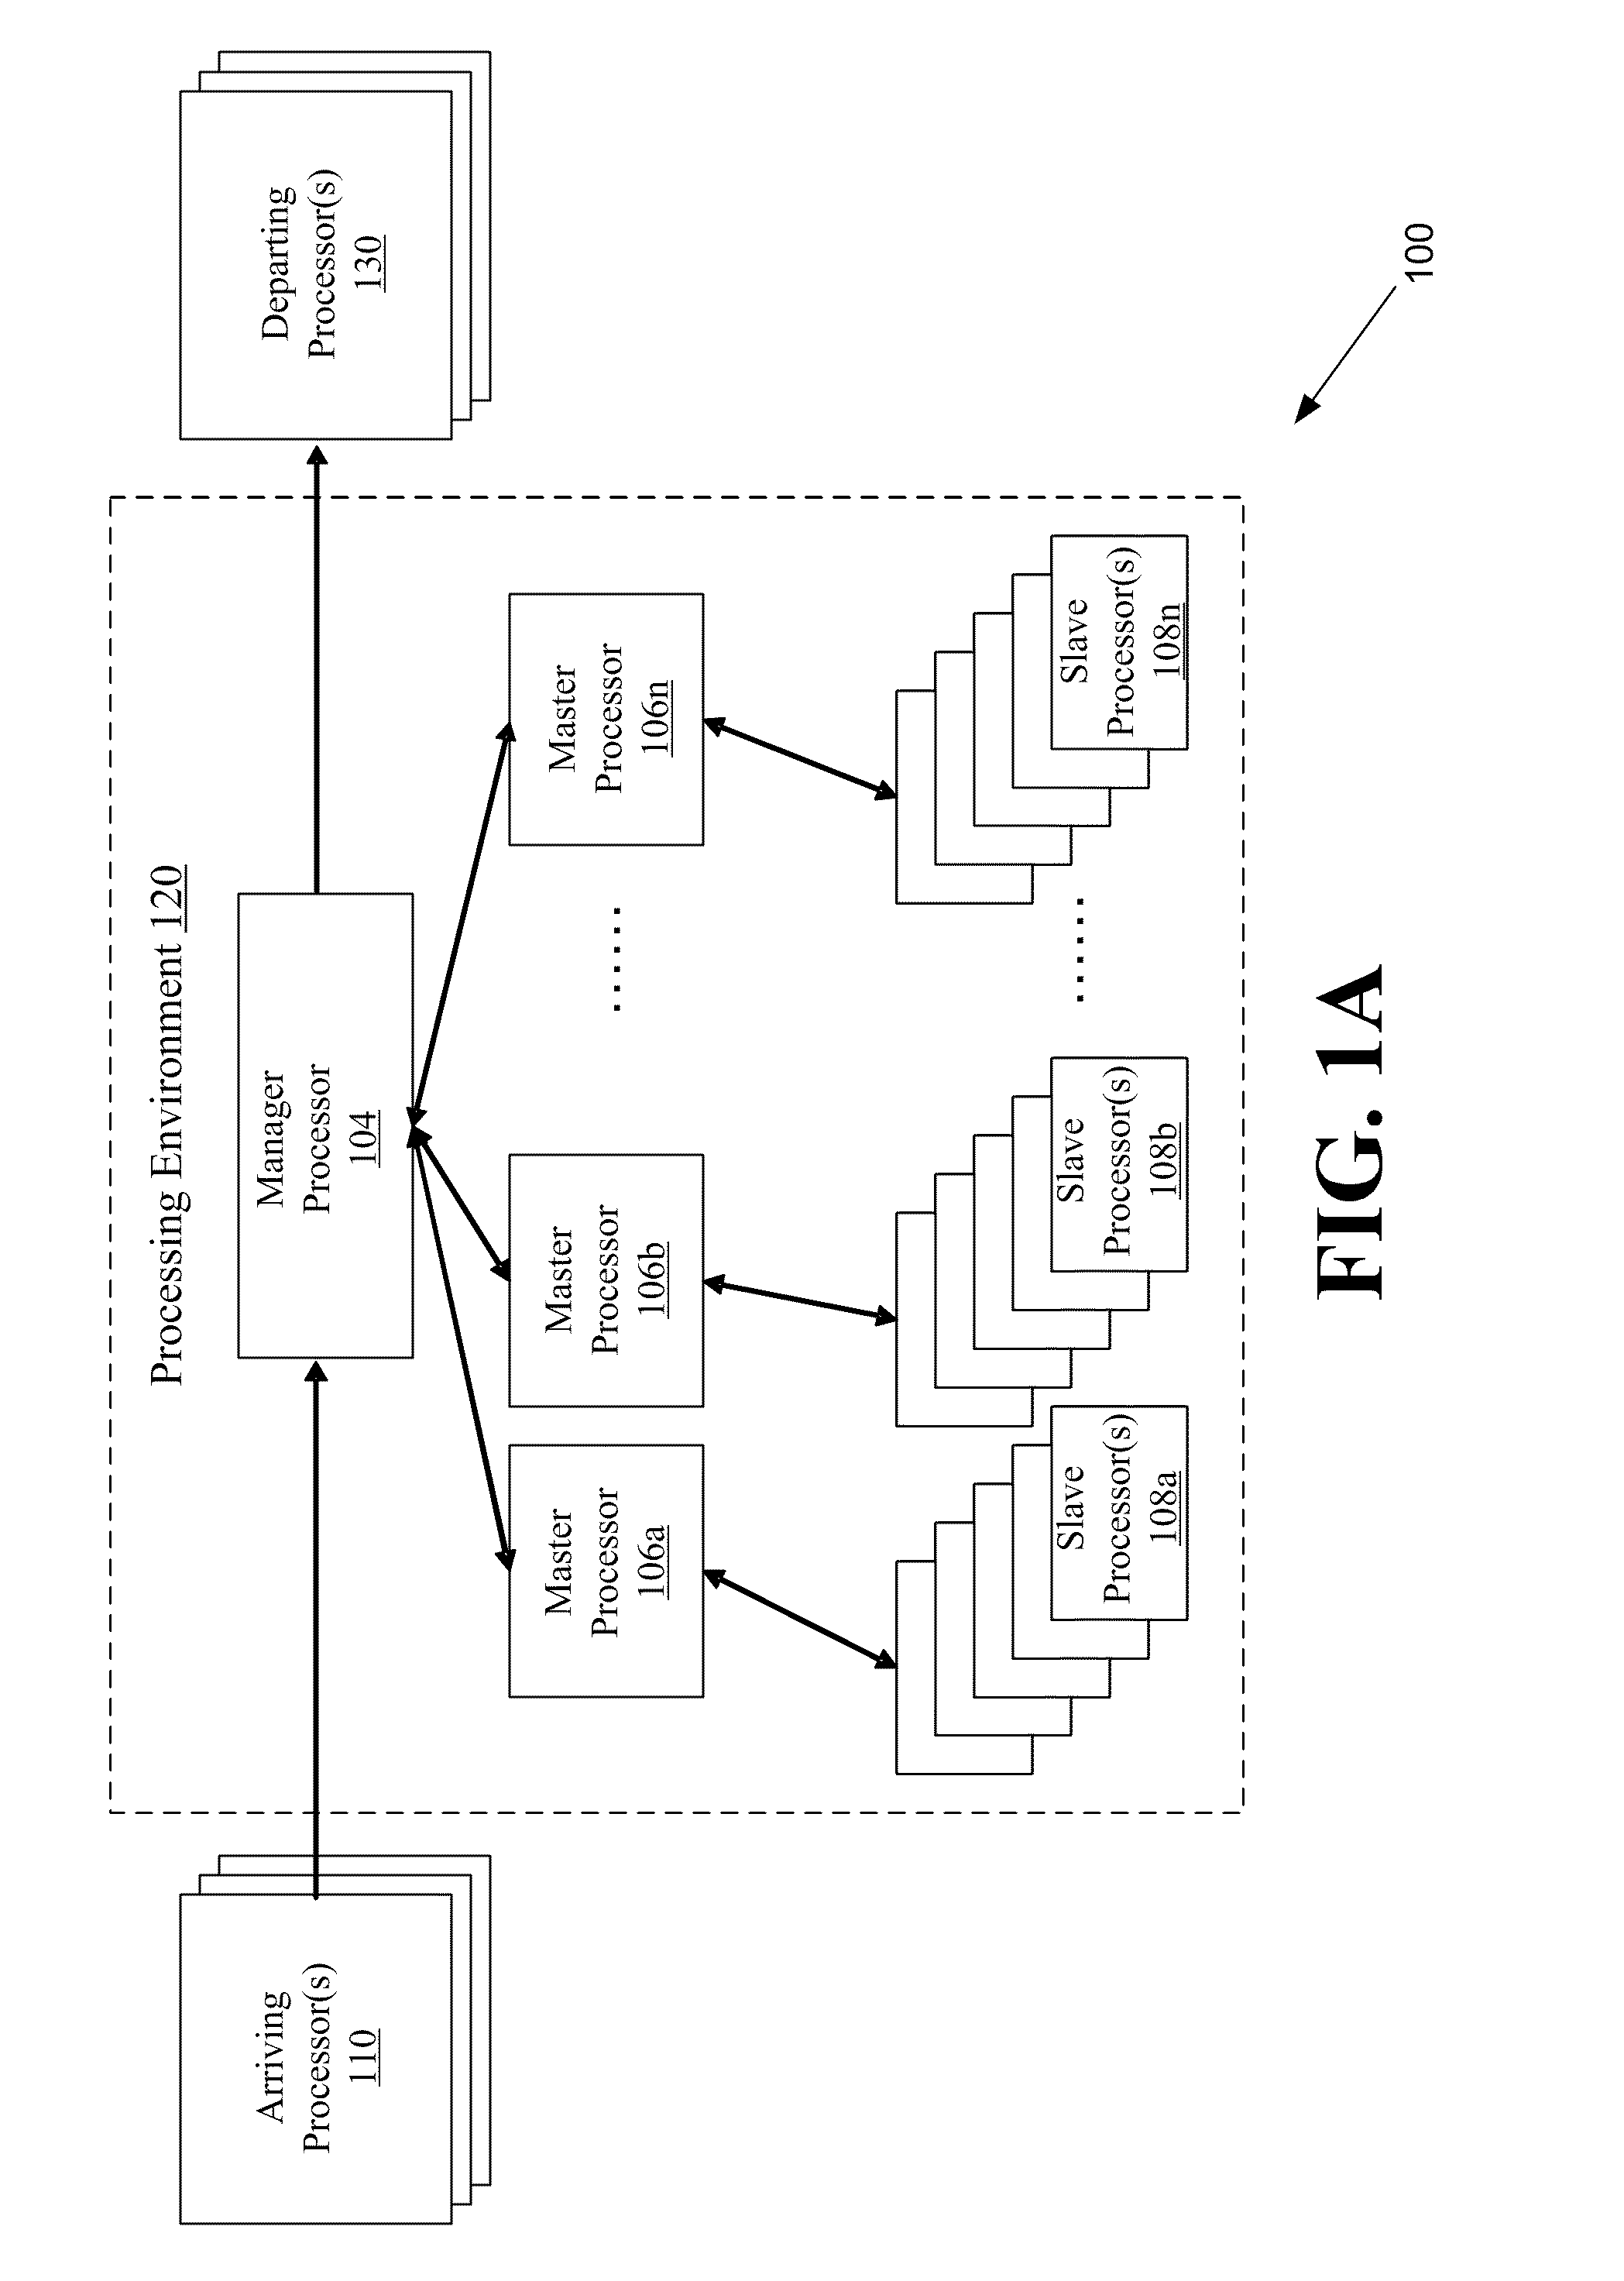 Systems and methods for parallel processing optimization for an evolutionary algorithm